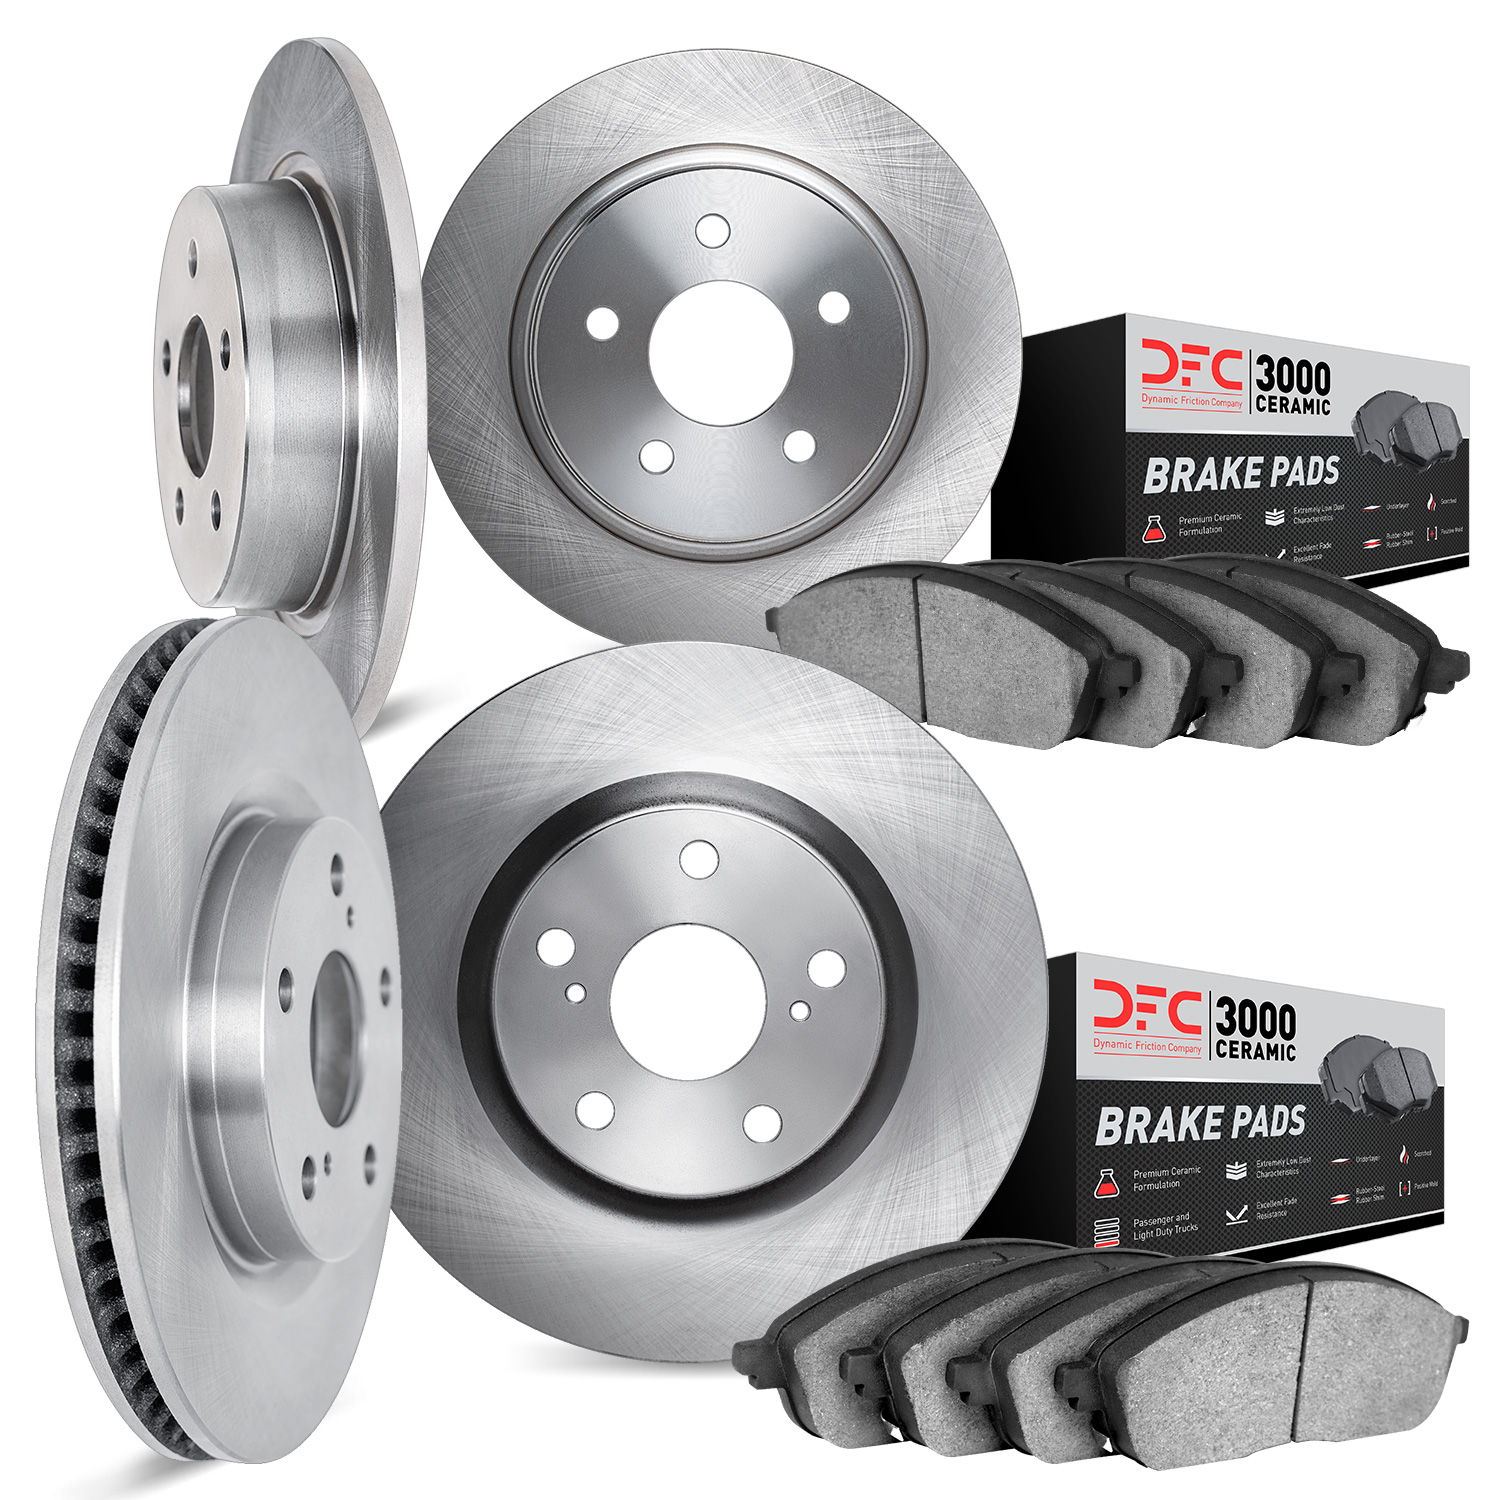 6304-42021 Brake Rotors with 3000-Series Ceramic Brake Pads Kit, Fits Select Mopar, Position: Front and Rear